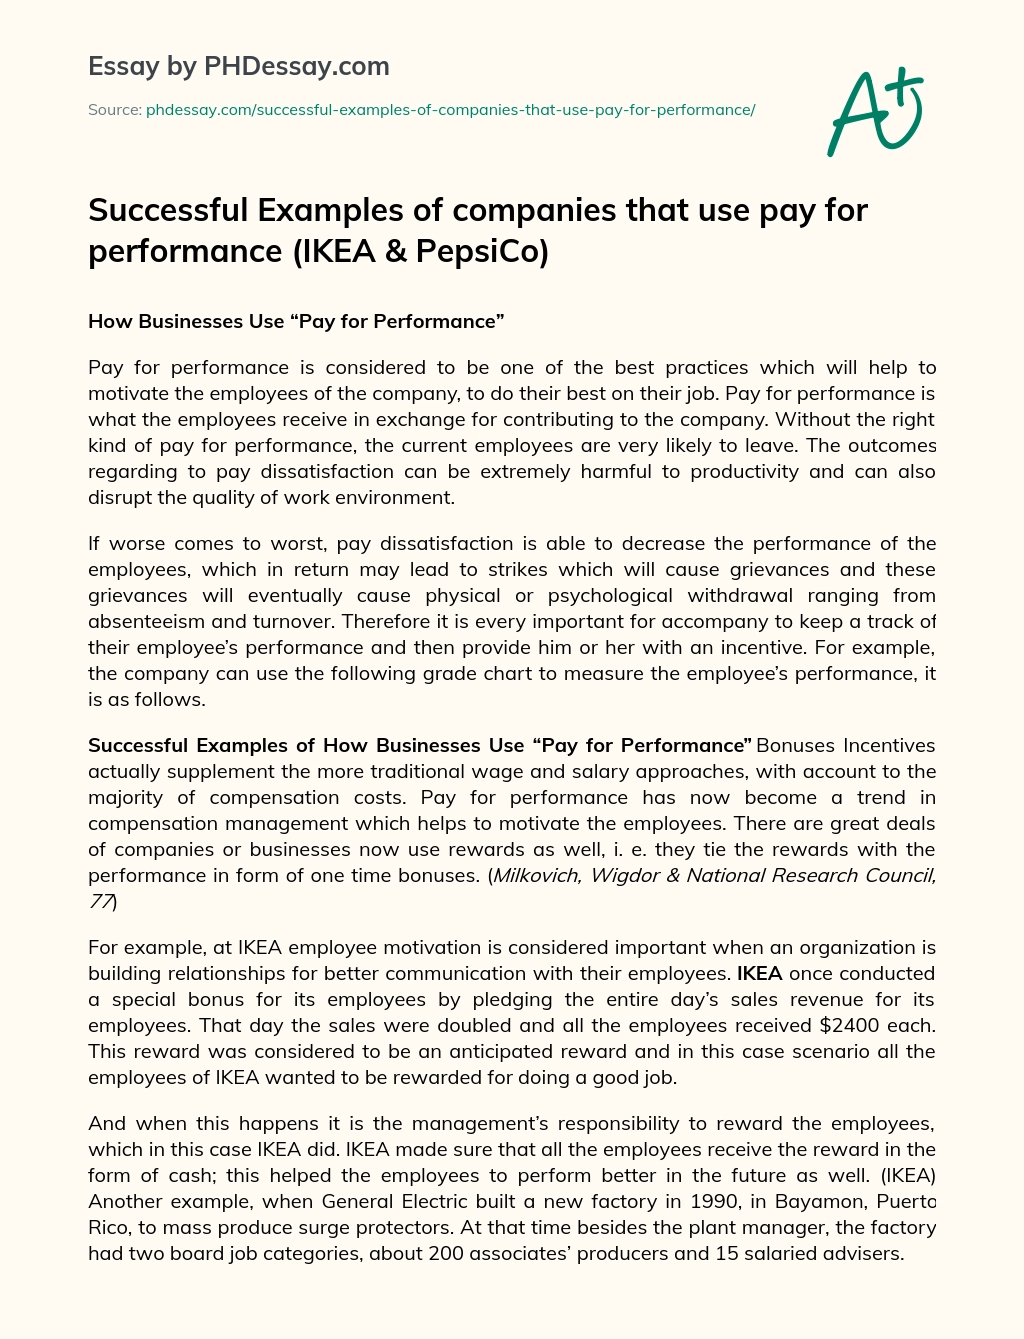 Successful Examples of companies that use pay for performance (IKEA & PepsiCo) essay